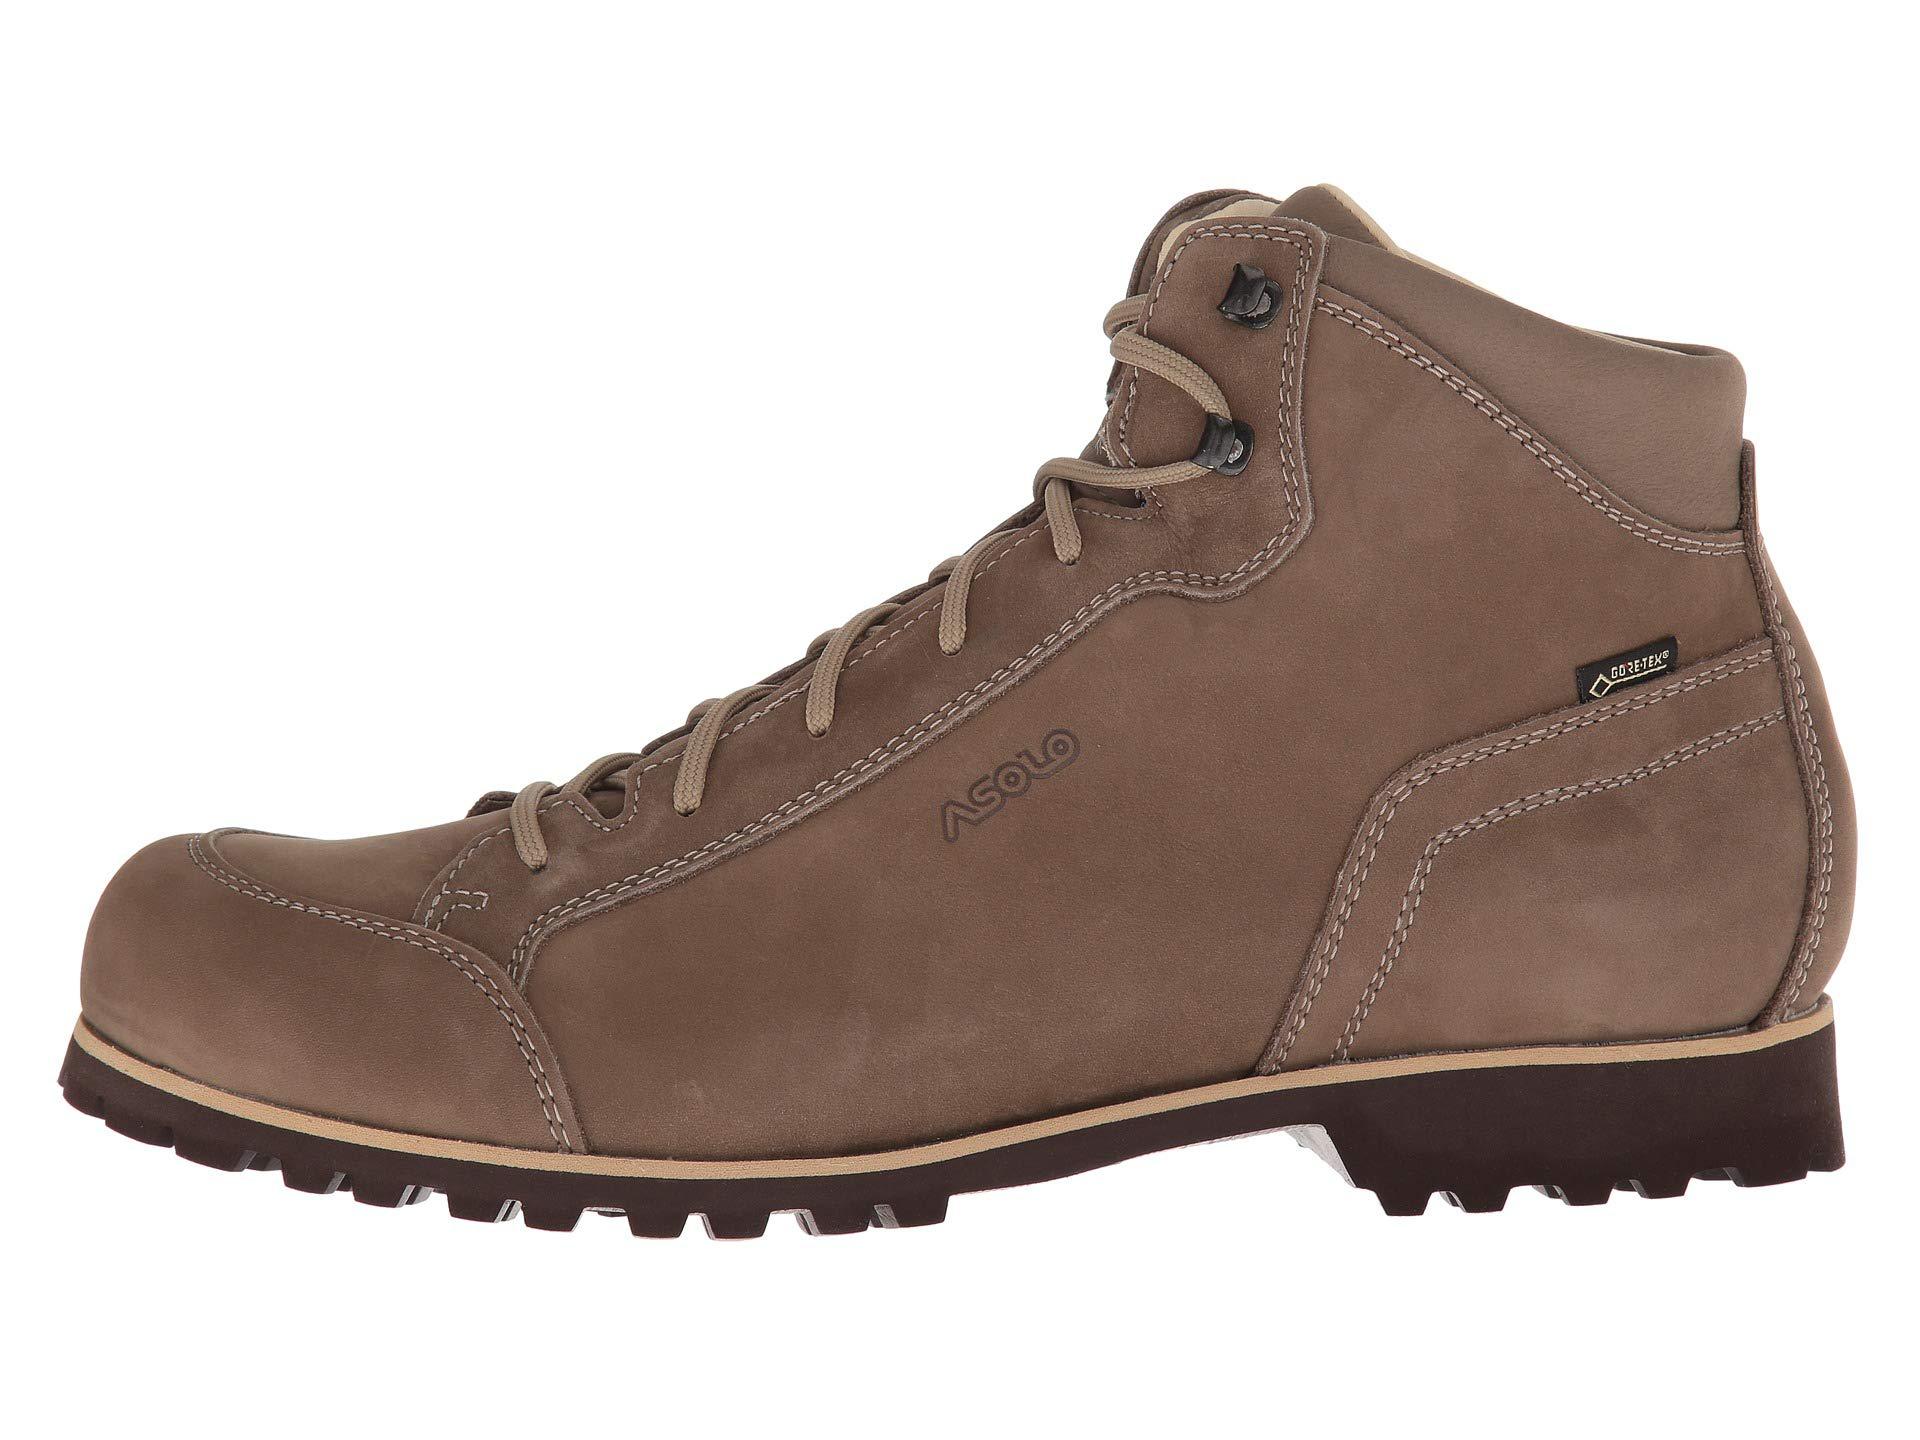 Asolo Leather Adventure Gv Mm in Brown 